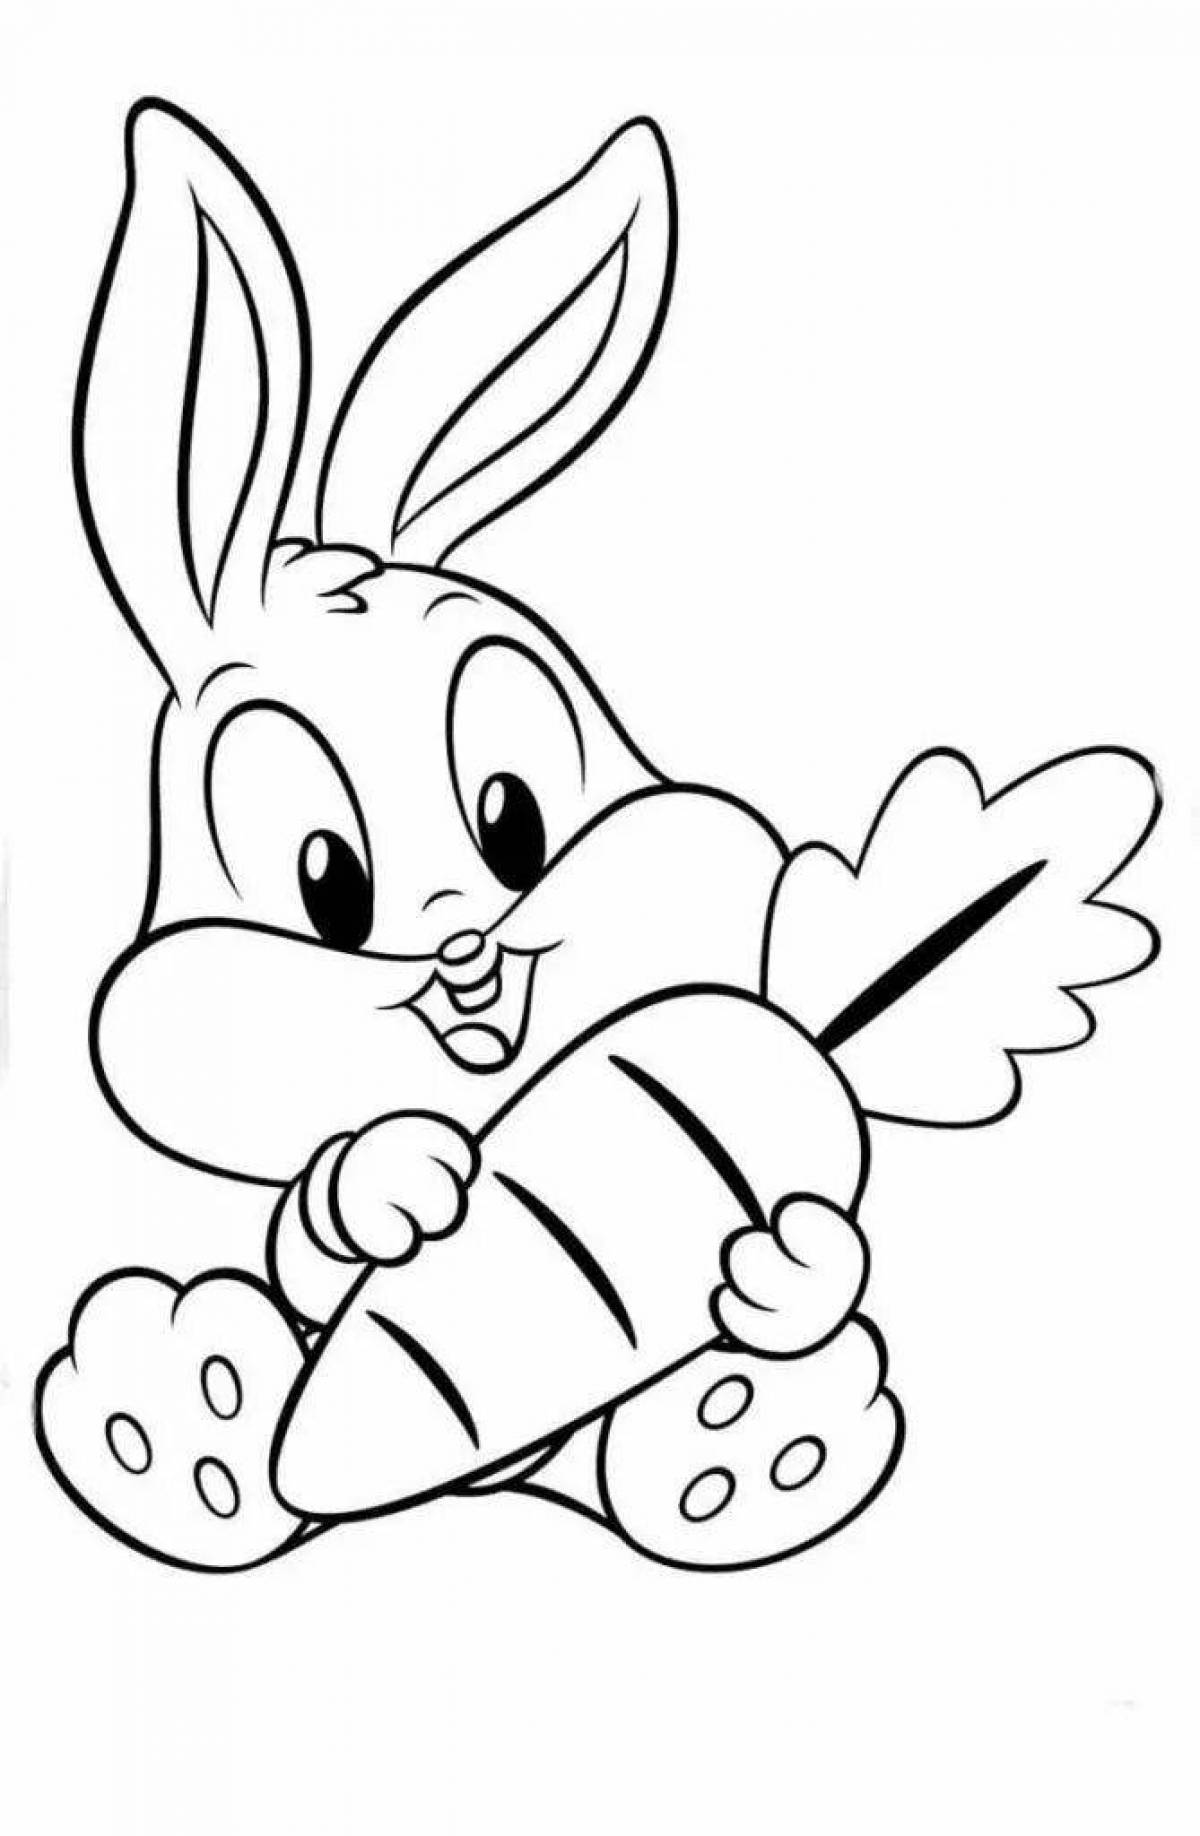 Wonderful bunny coloring book for children 6-7 years old